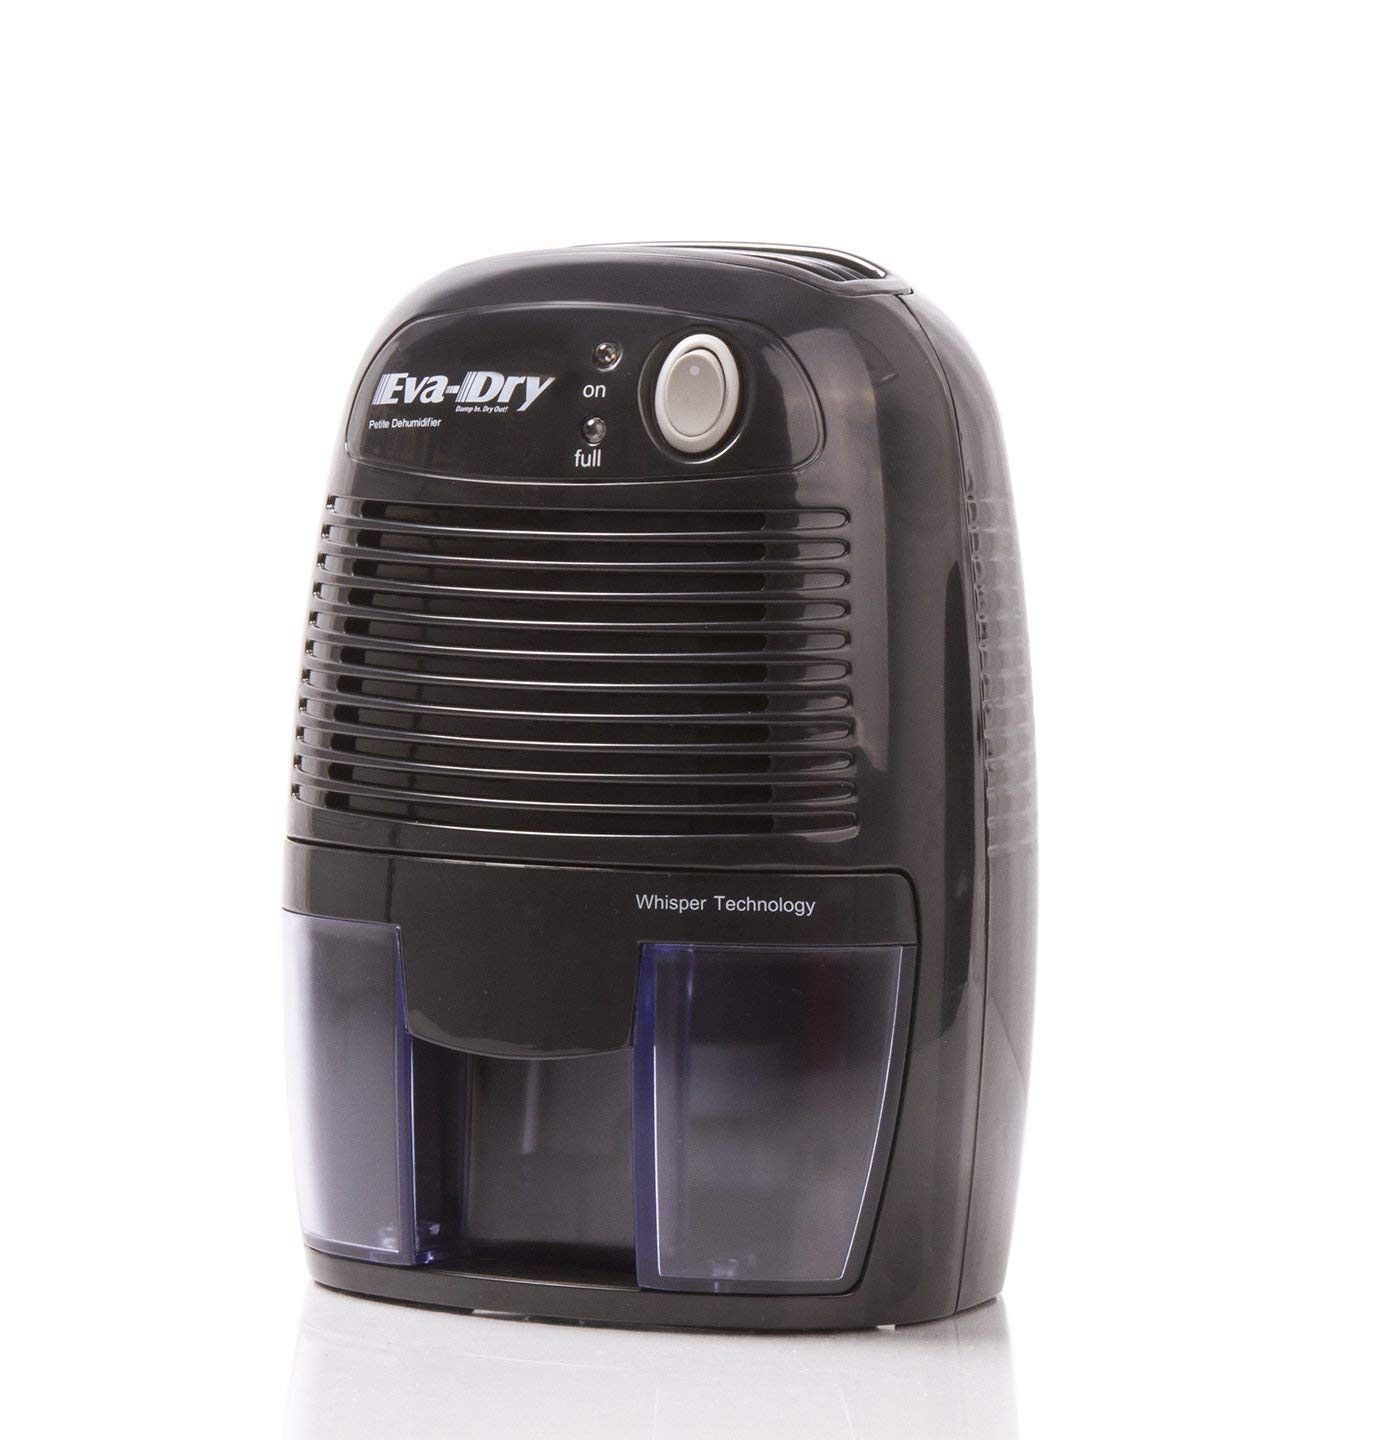 Eva-Dry Electric Petite Portable Dehumidifiers EDV 1100 Black (1 for $40 or both for $70)